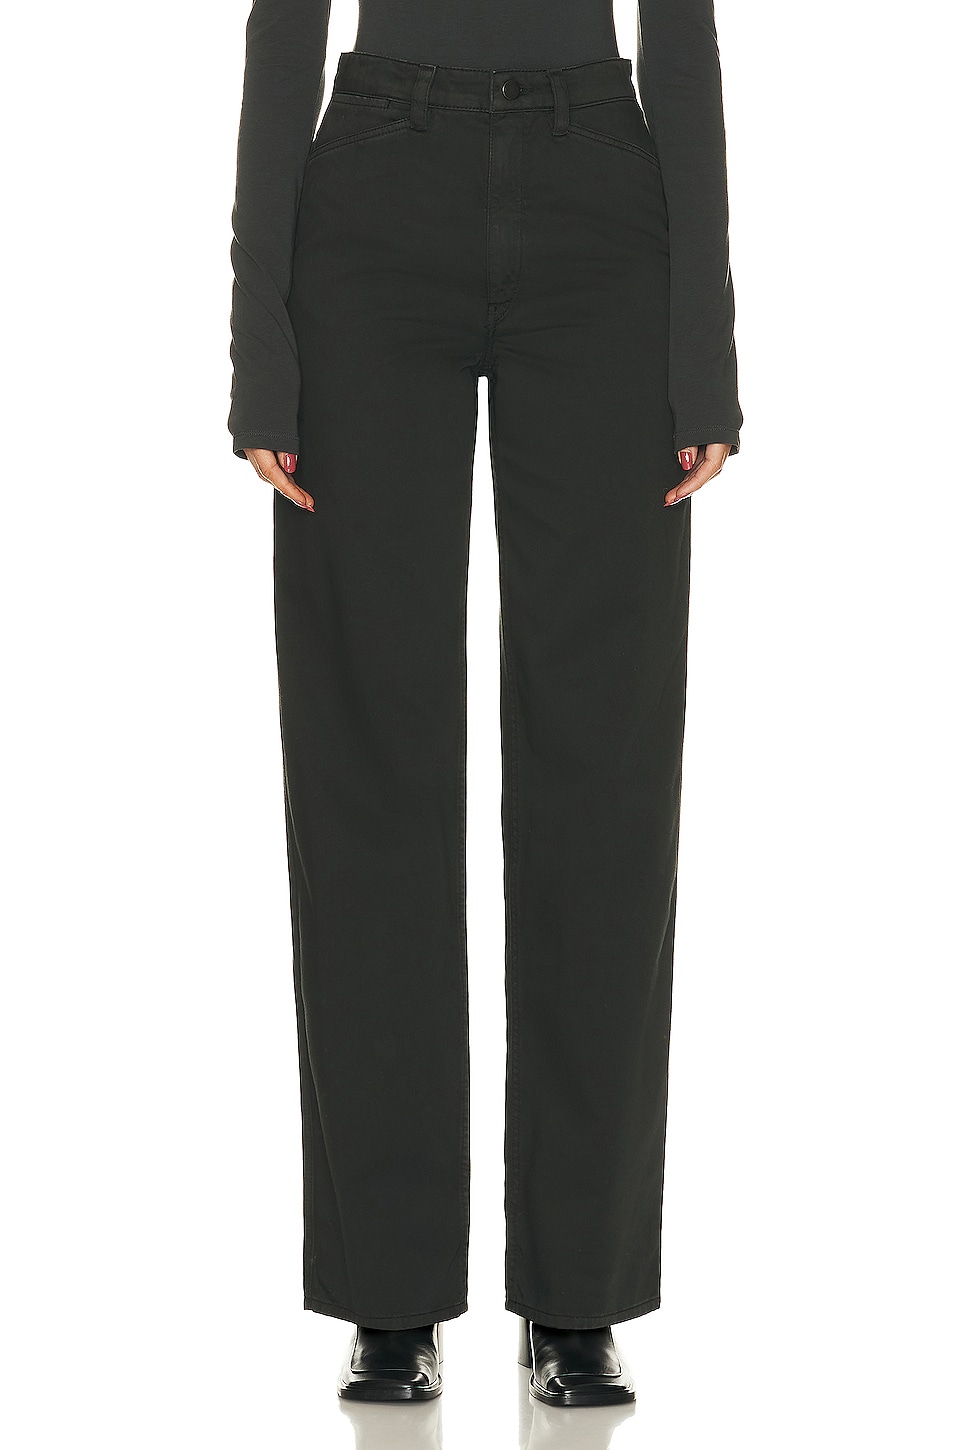 Image 1 of Lemaire High Waisted Straight Pant in Midnight Green